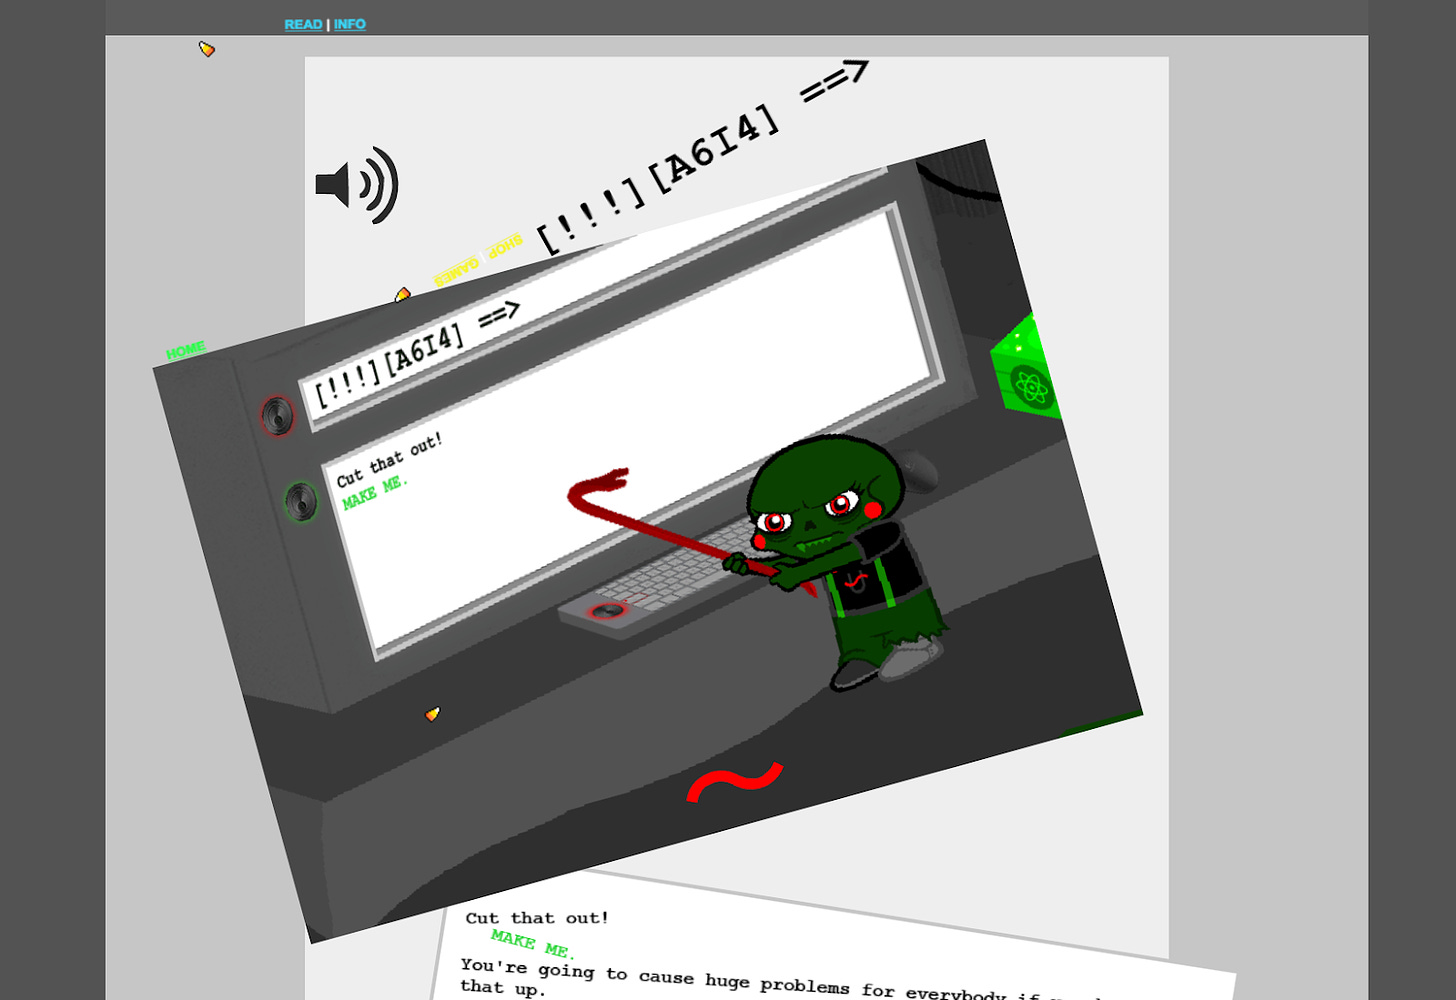 A screenshot of Homestuck, featuring the character Caliborn hitting a computer console. Around him, the site is falling apart, with the various HTML elements overlapping at askew angles